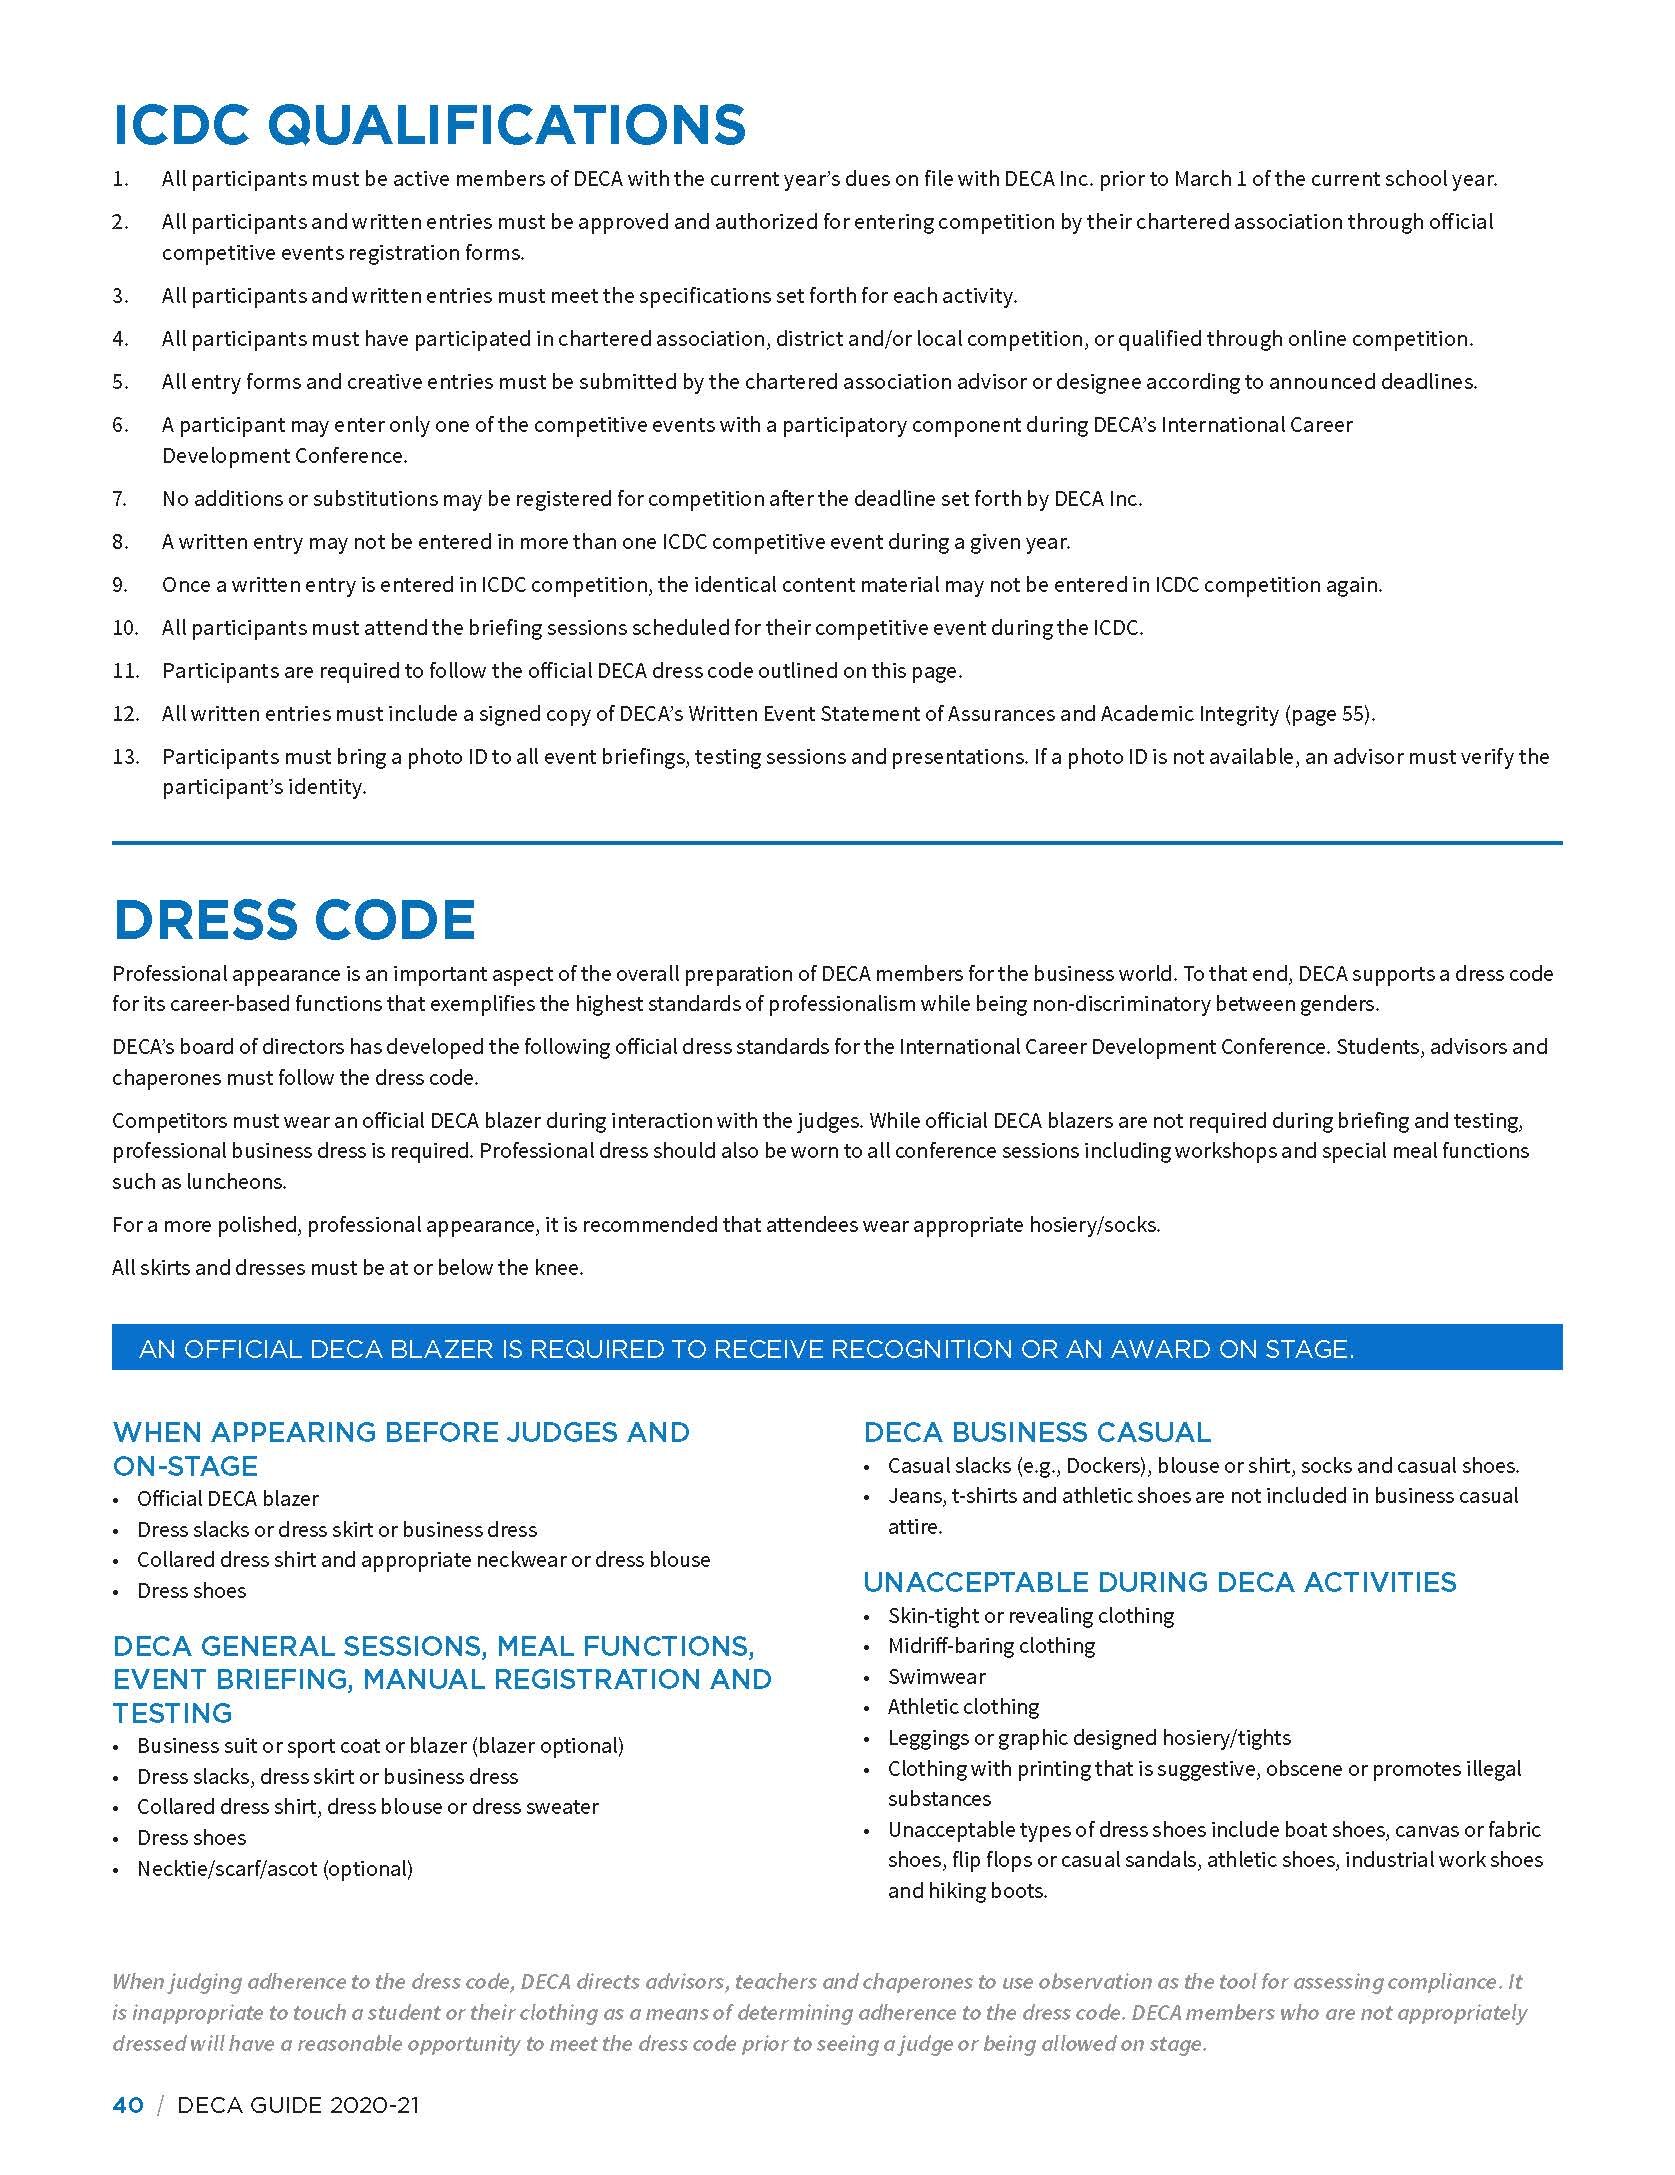 DECA-2020-HS-Guide_Page_042.jpg